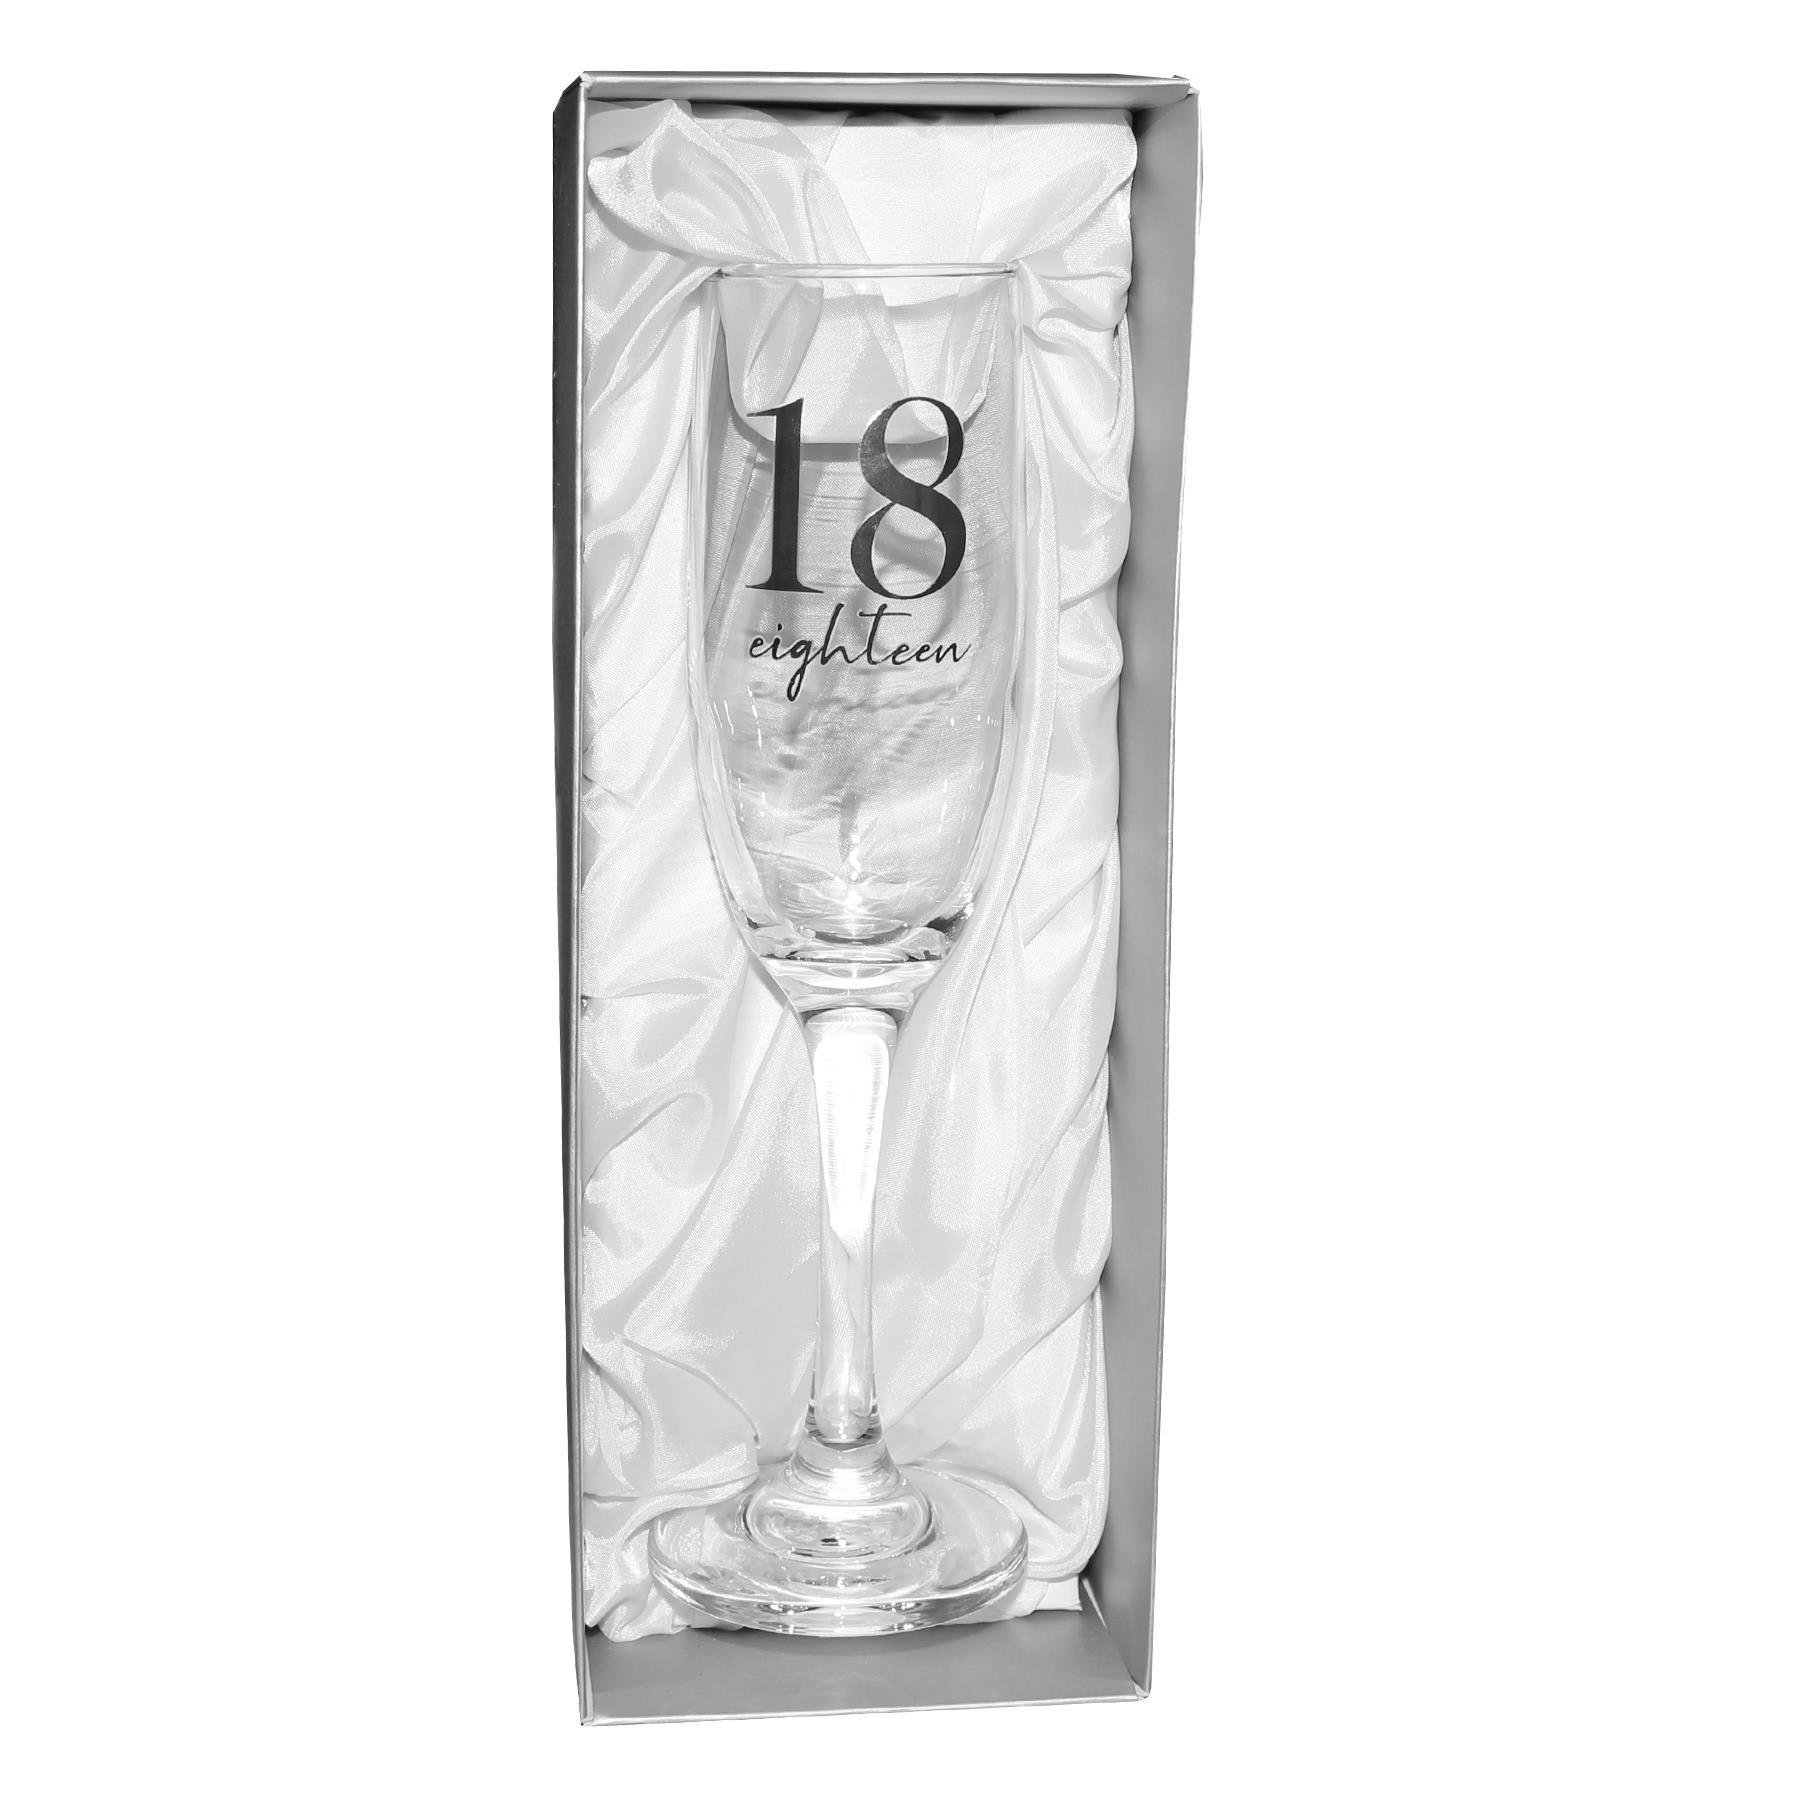 Birthday Champagne Flute Glass with Silver Detail - 18